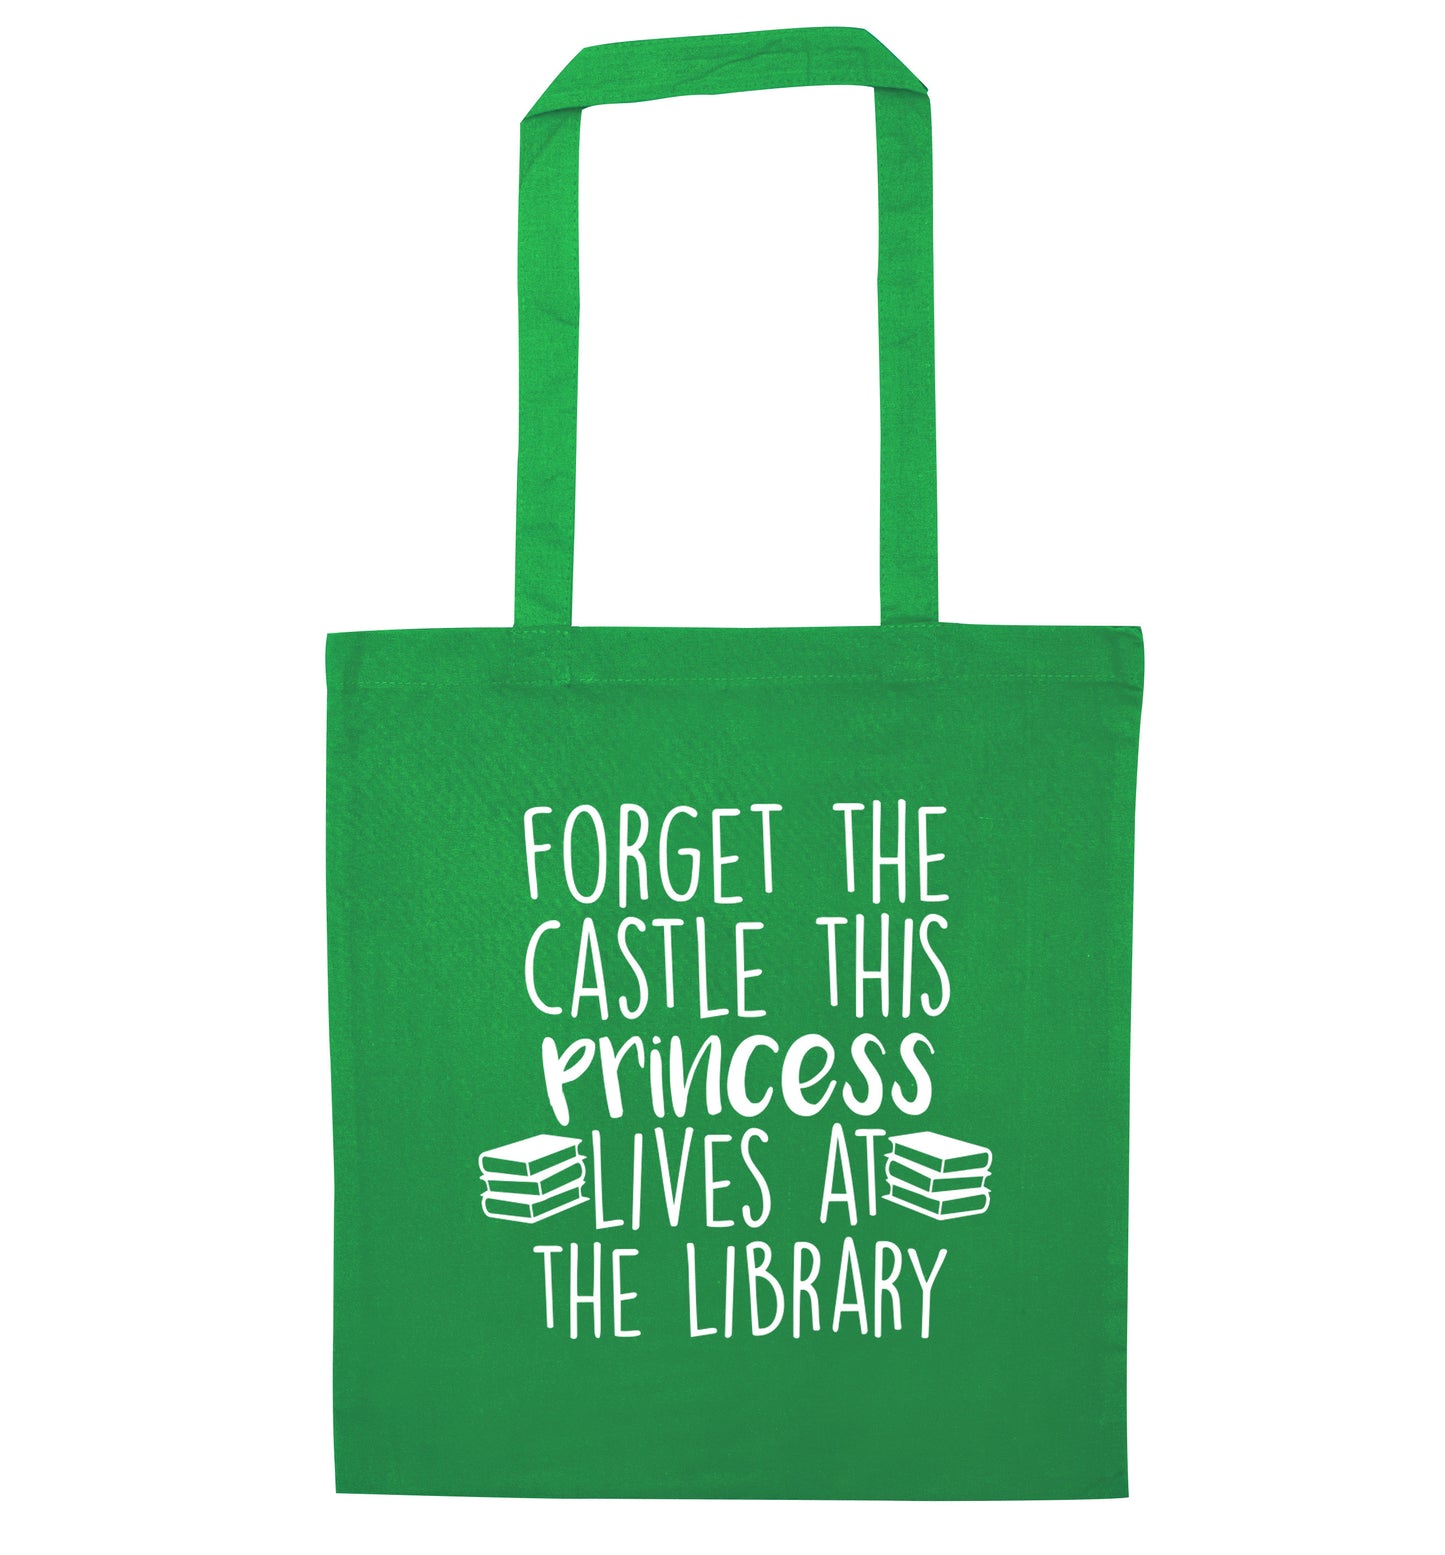 Forget the castle this princess lives at the library green tote bag